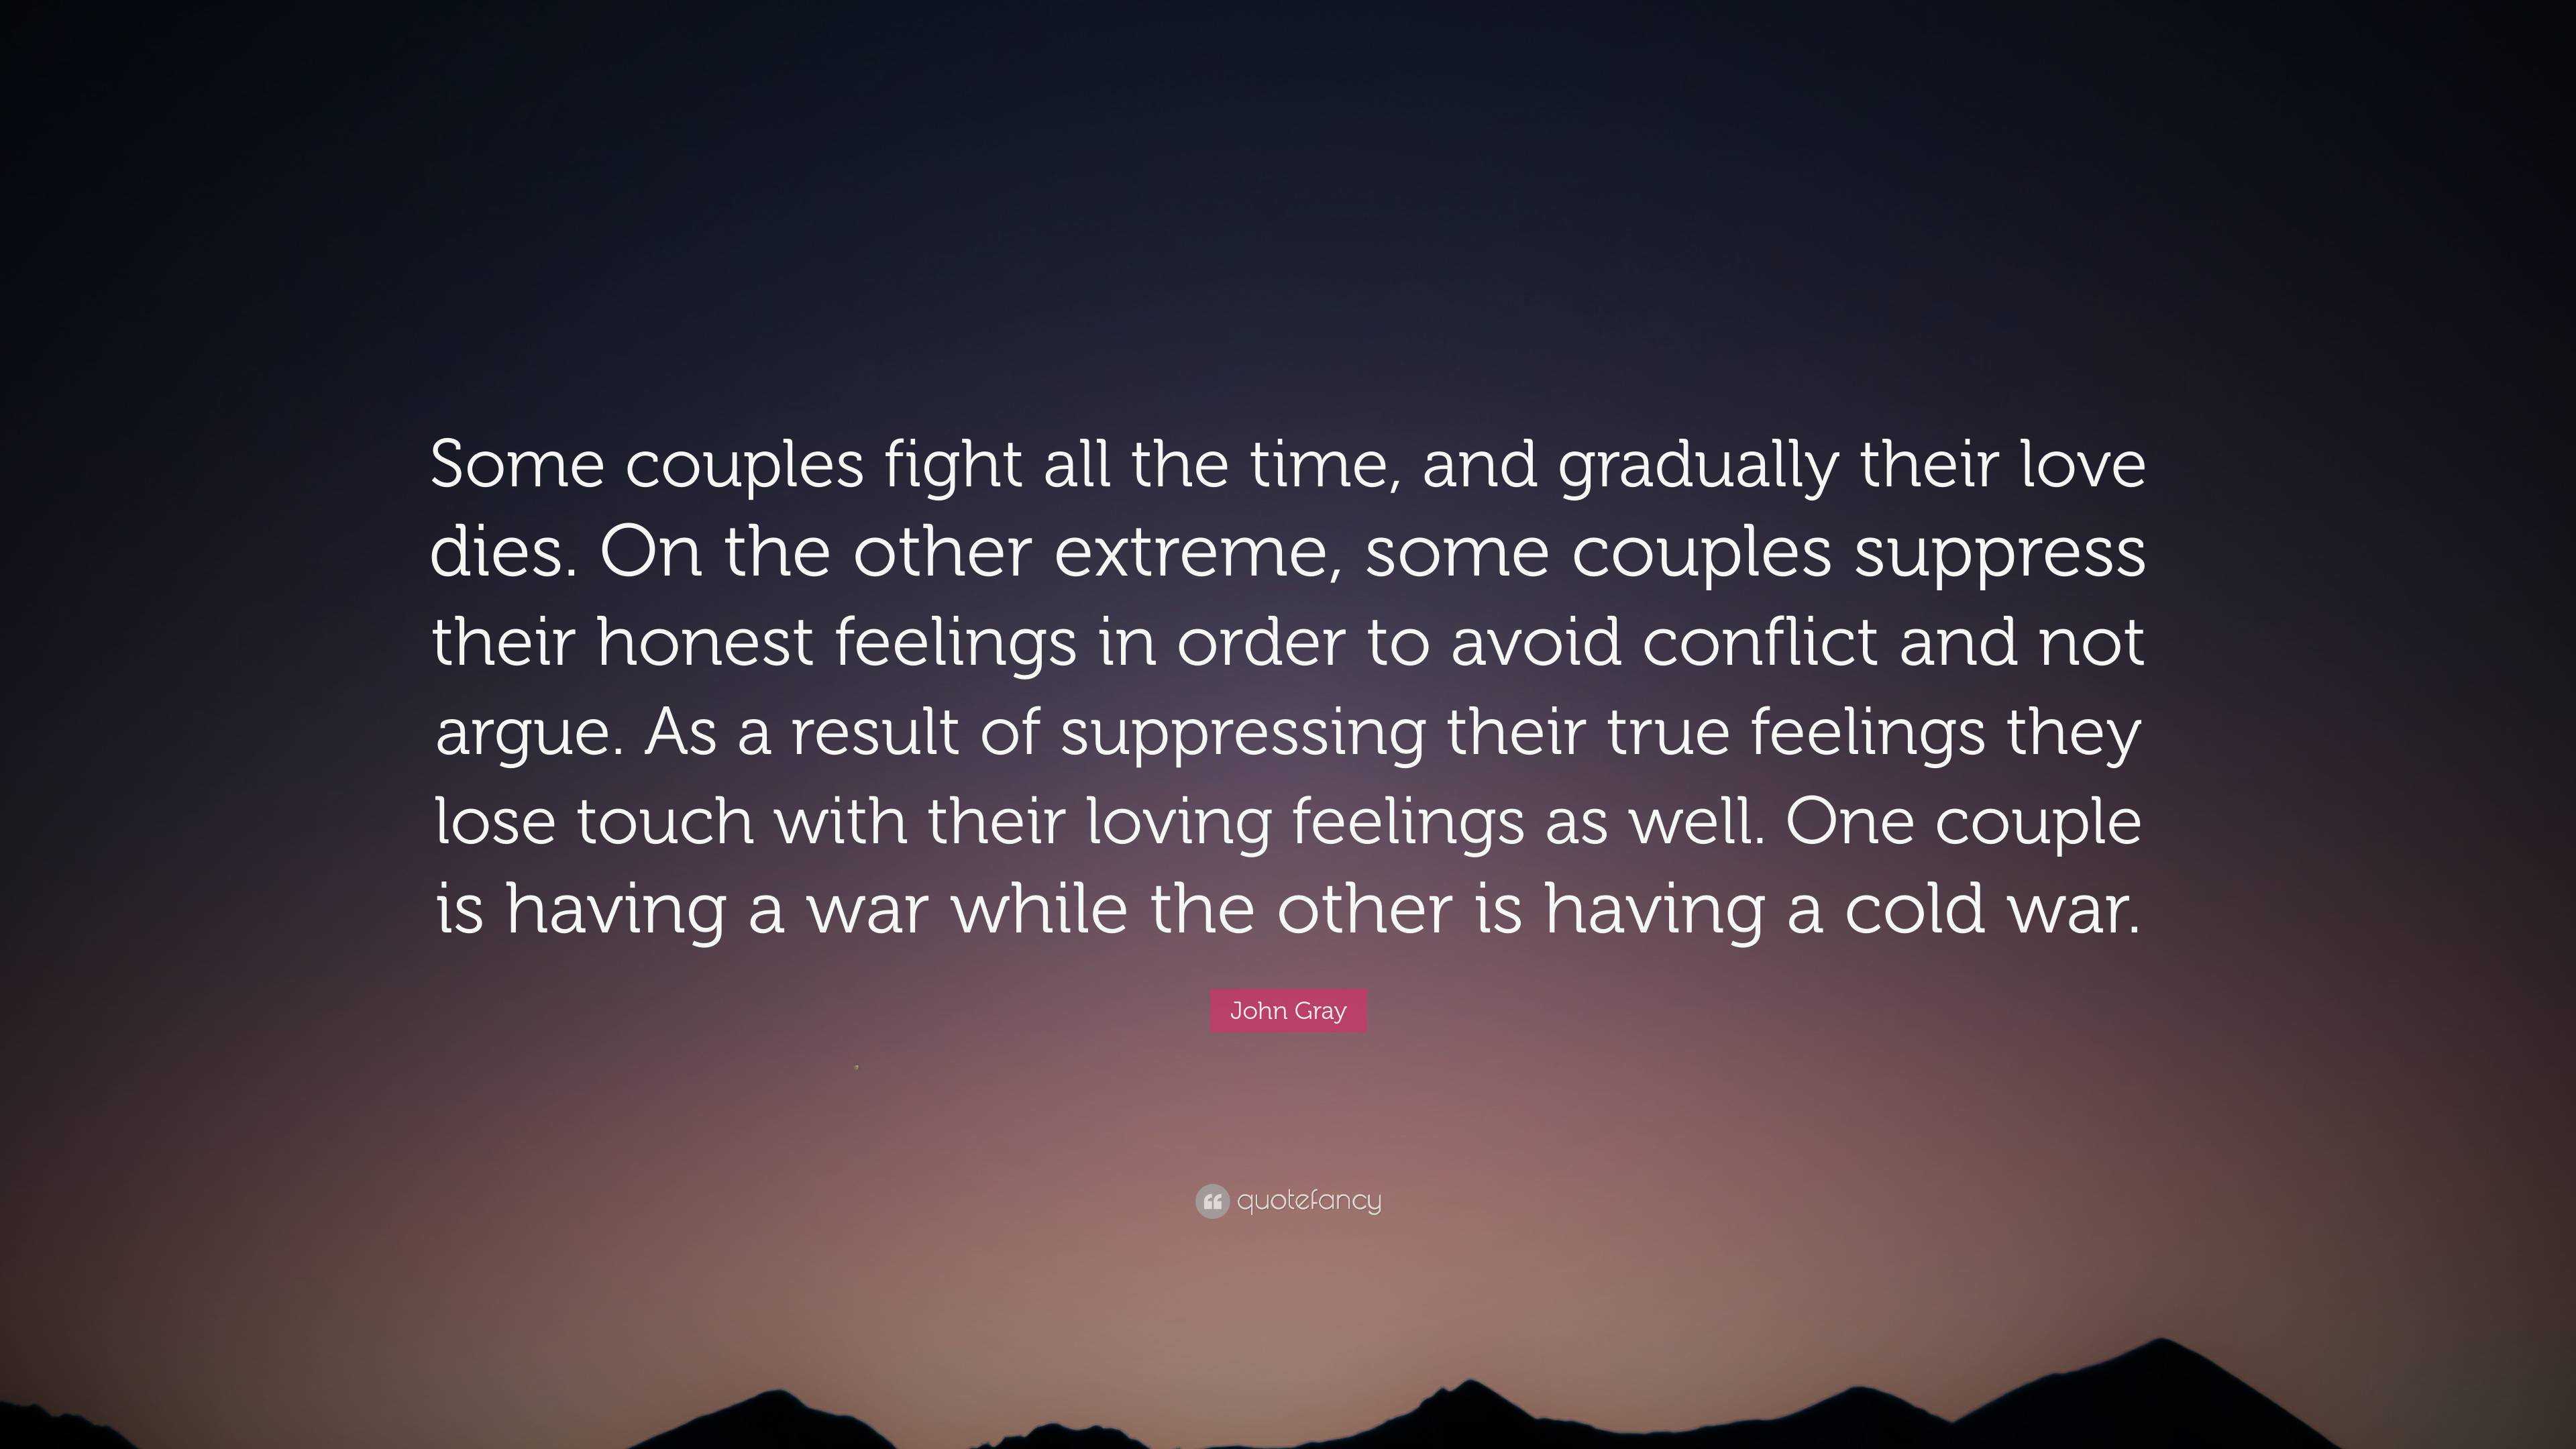 John Gray Quote Some Couples Fight All The Time And Gradually Their Love Dies On The Other Extreme Some Couples Suppress Their Honest